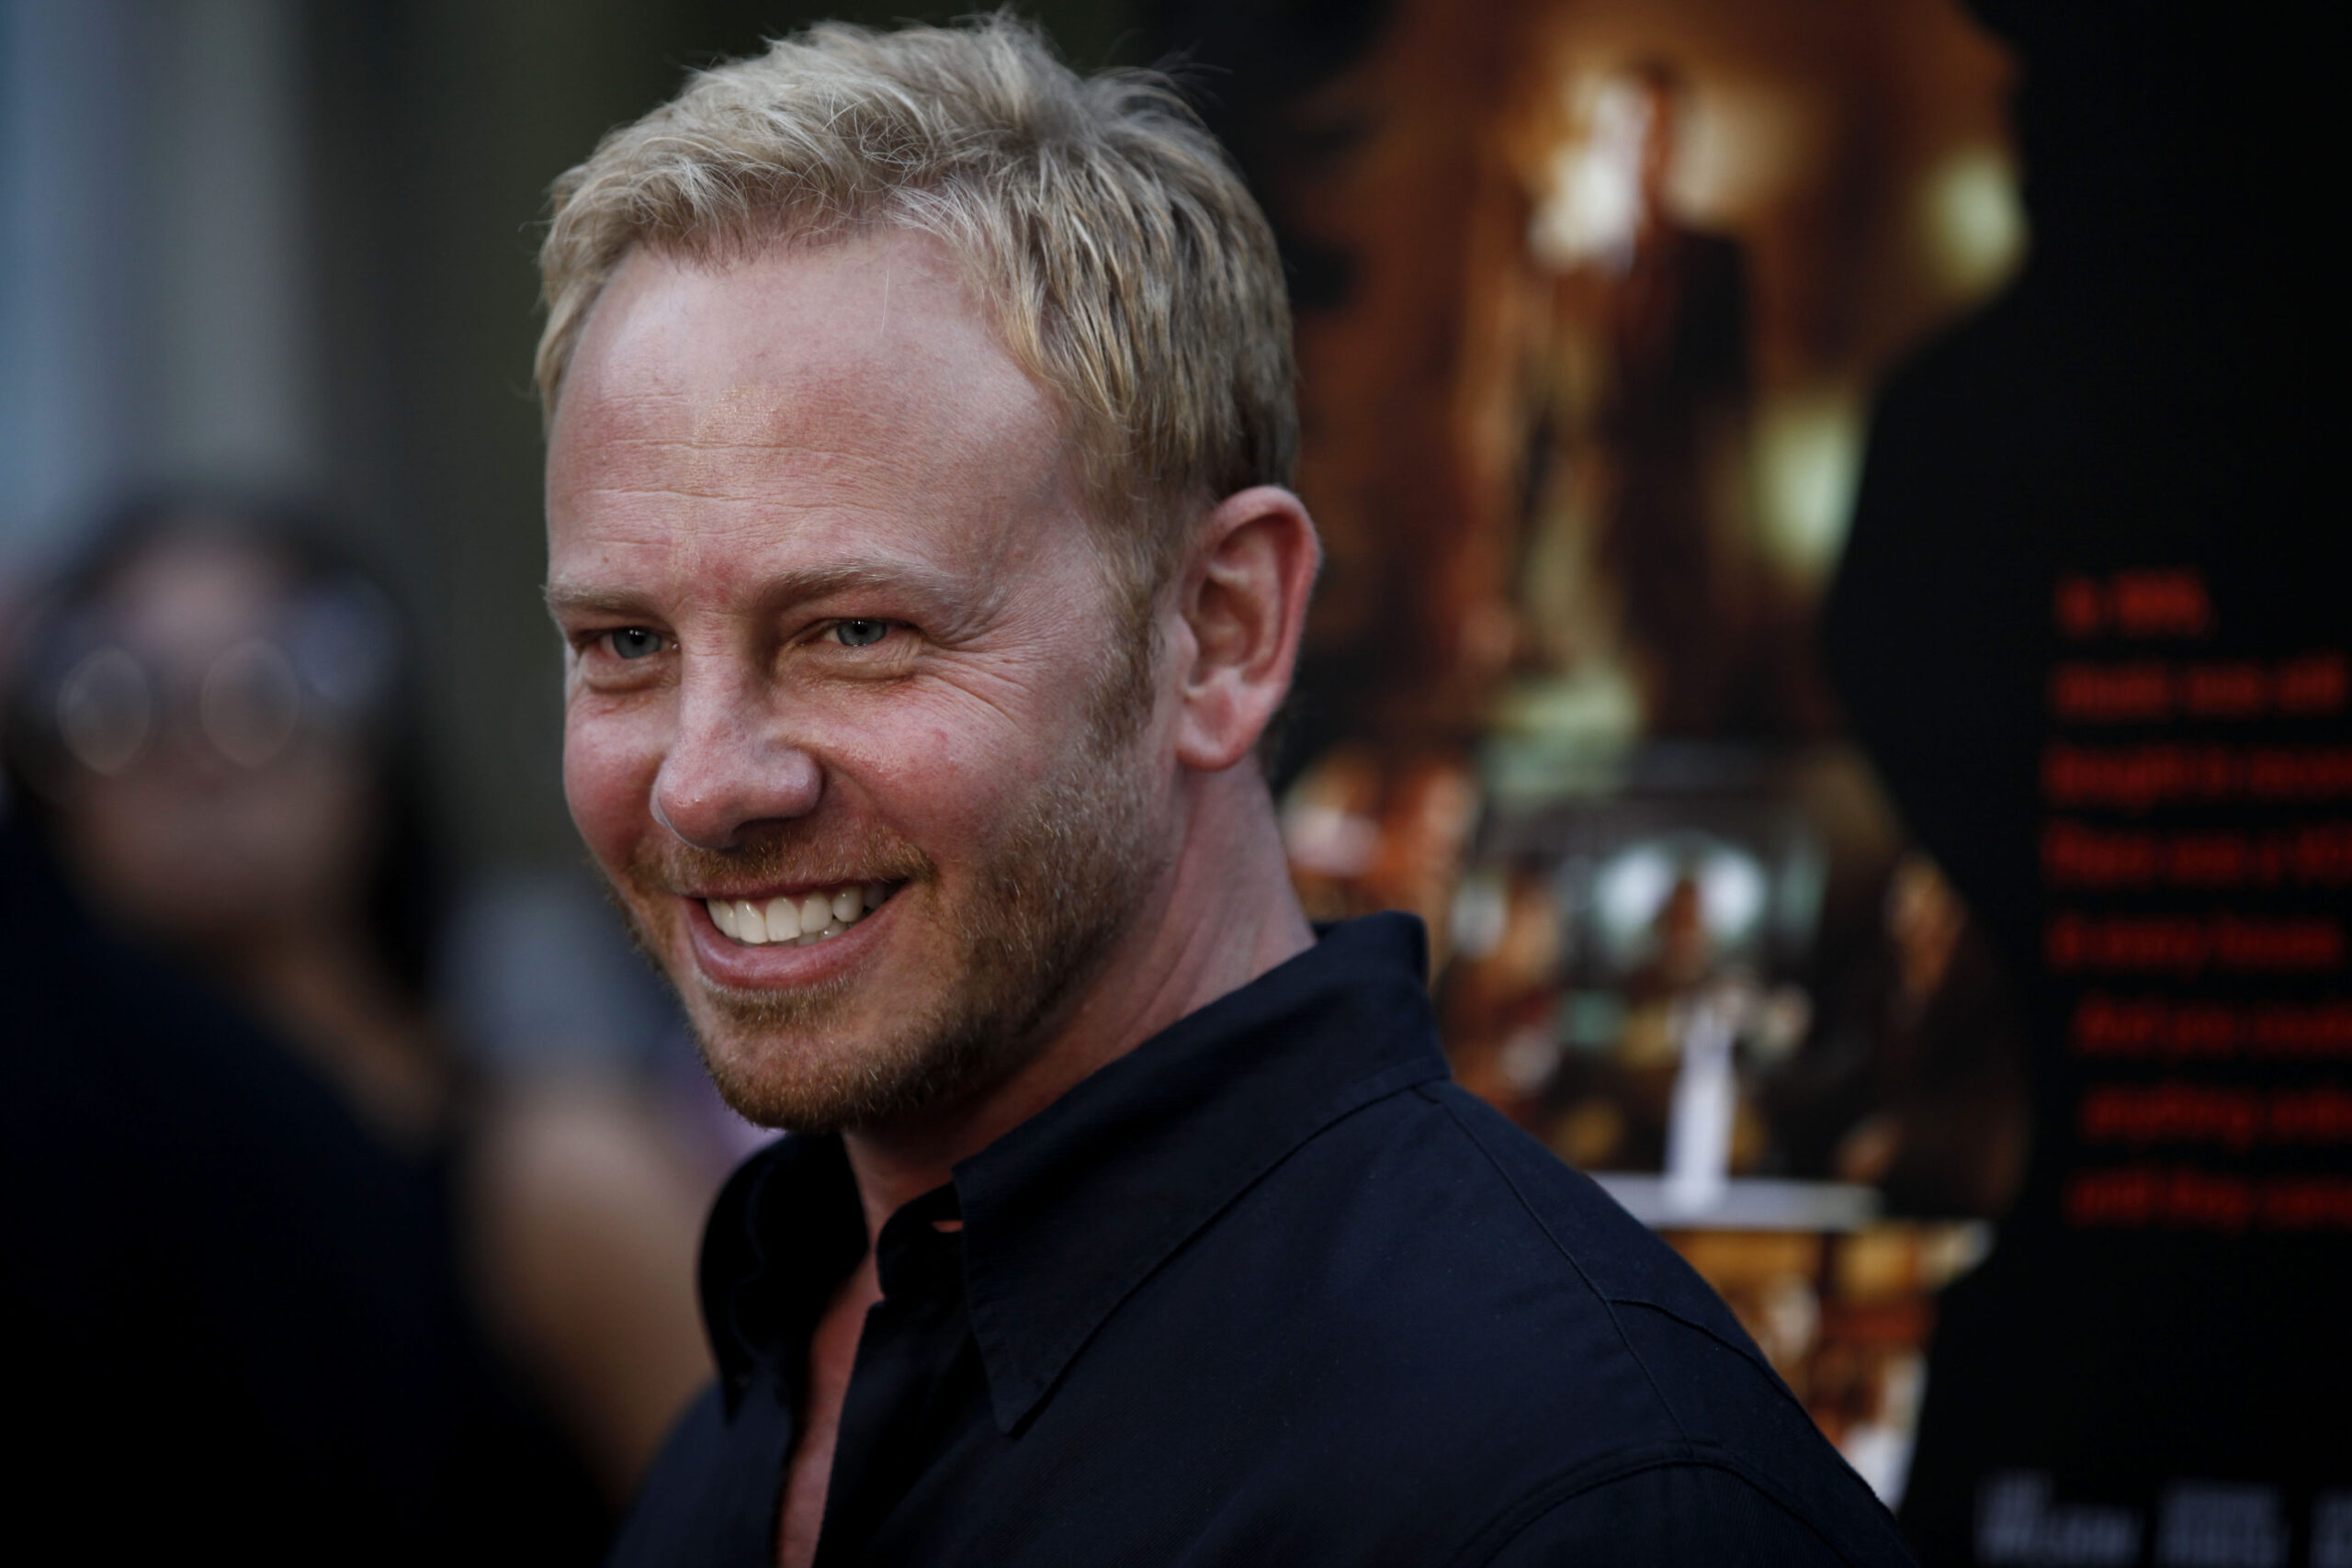 Ian Ziering arrives at the premiere of "Middle Men" in Los Angeles on Thursday, Aug. 5, 2010. (AP Photo/Matt Sayles)